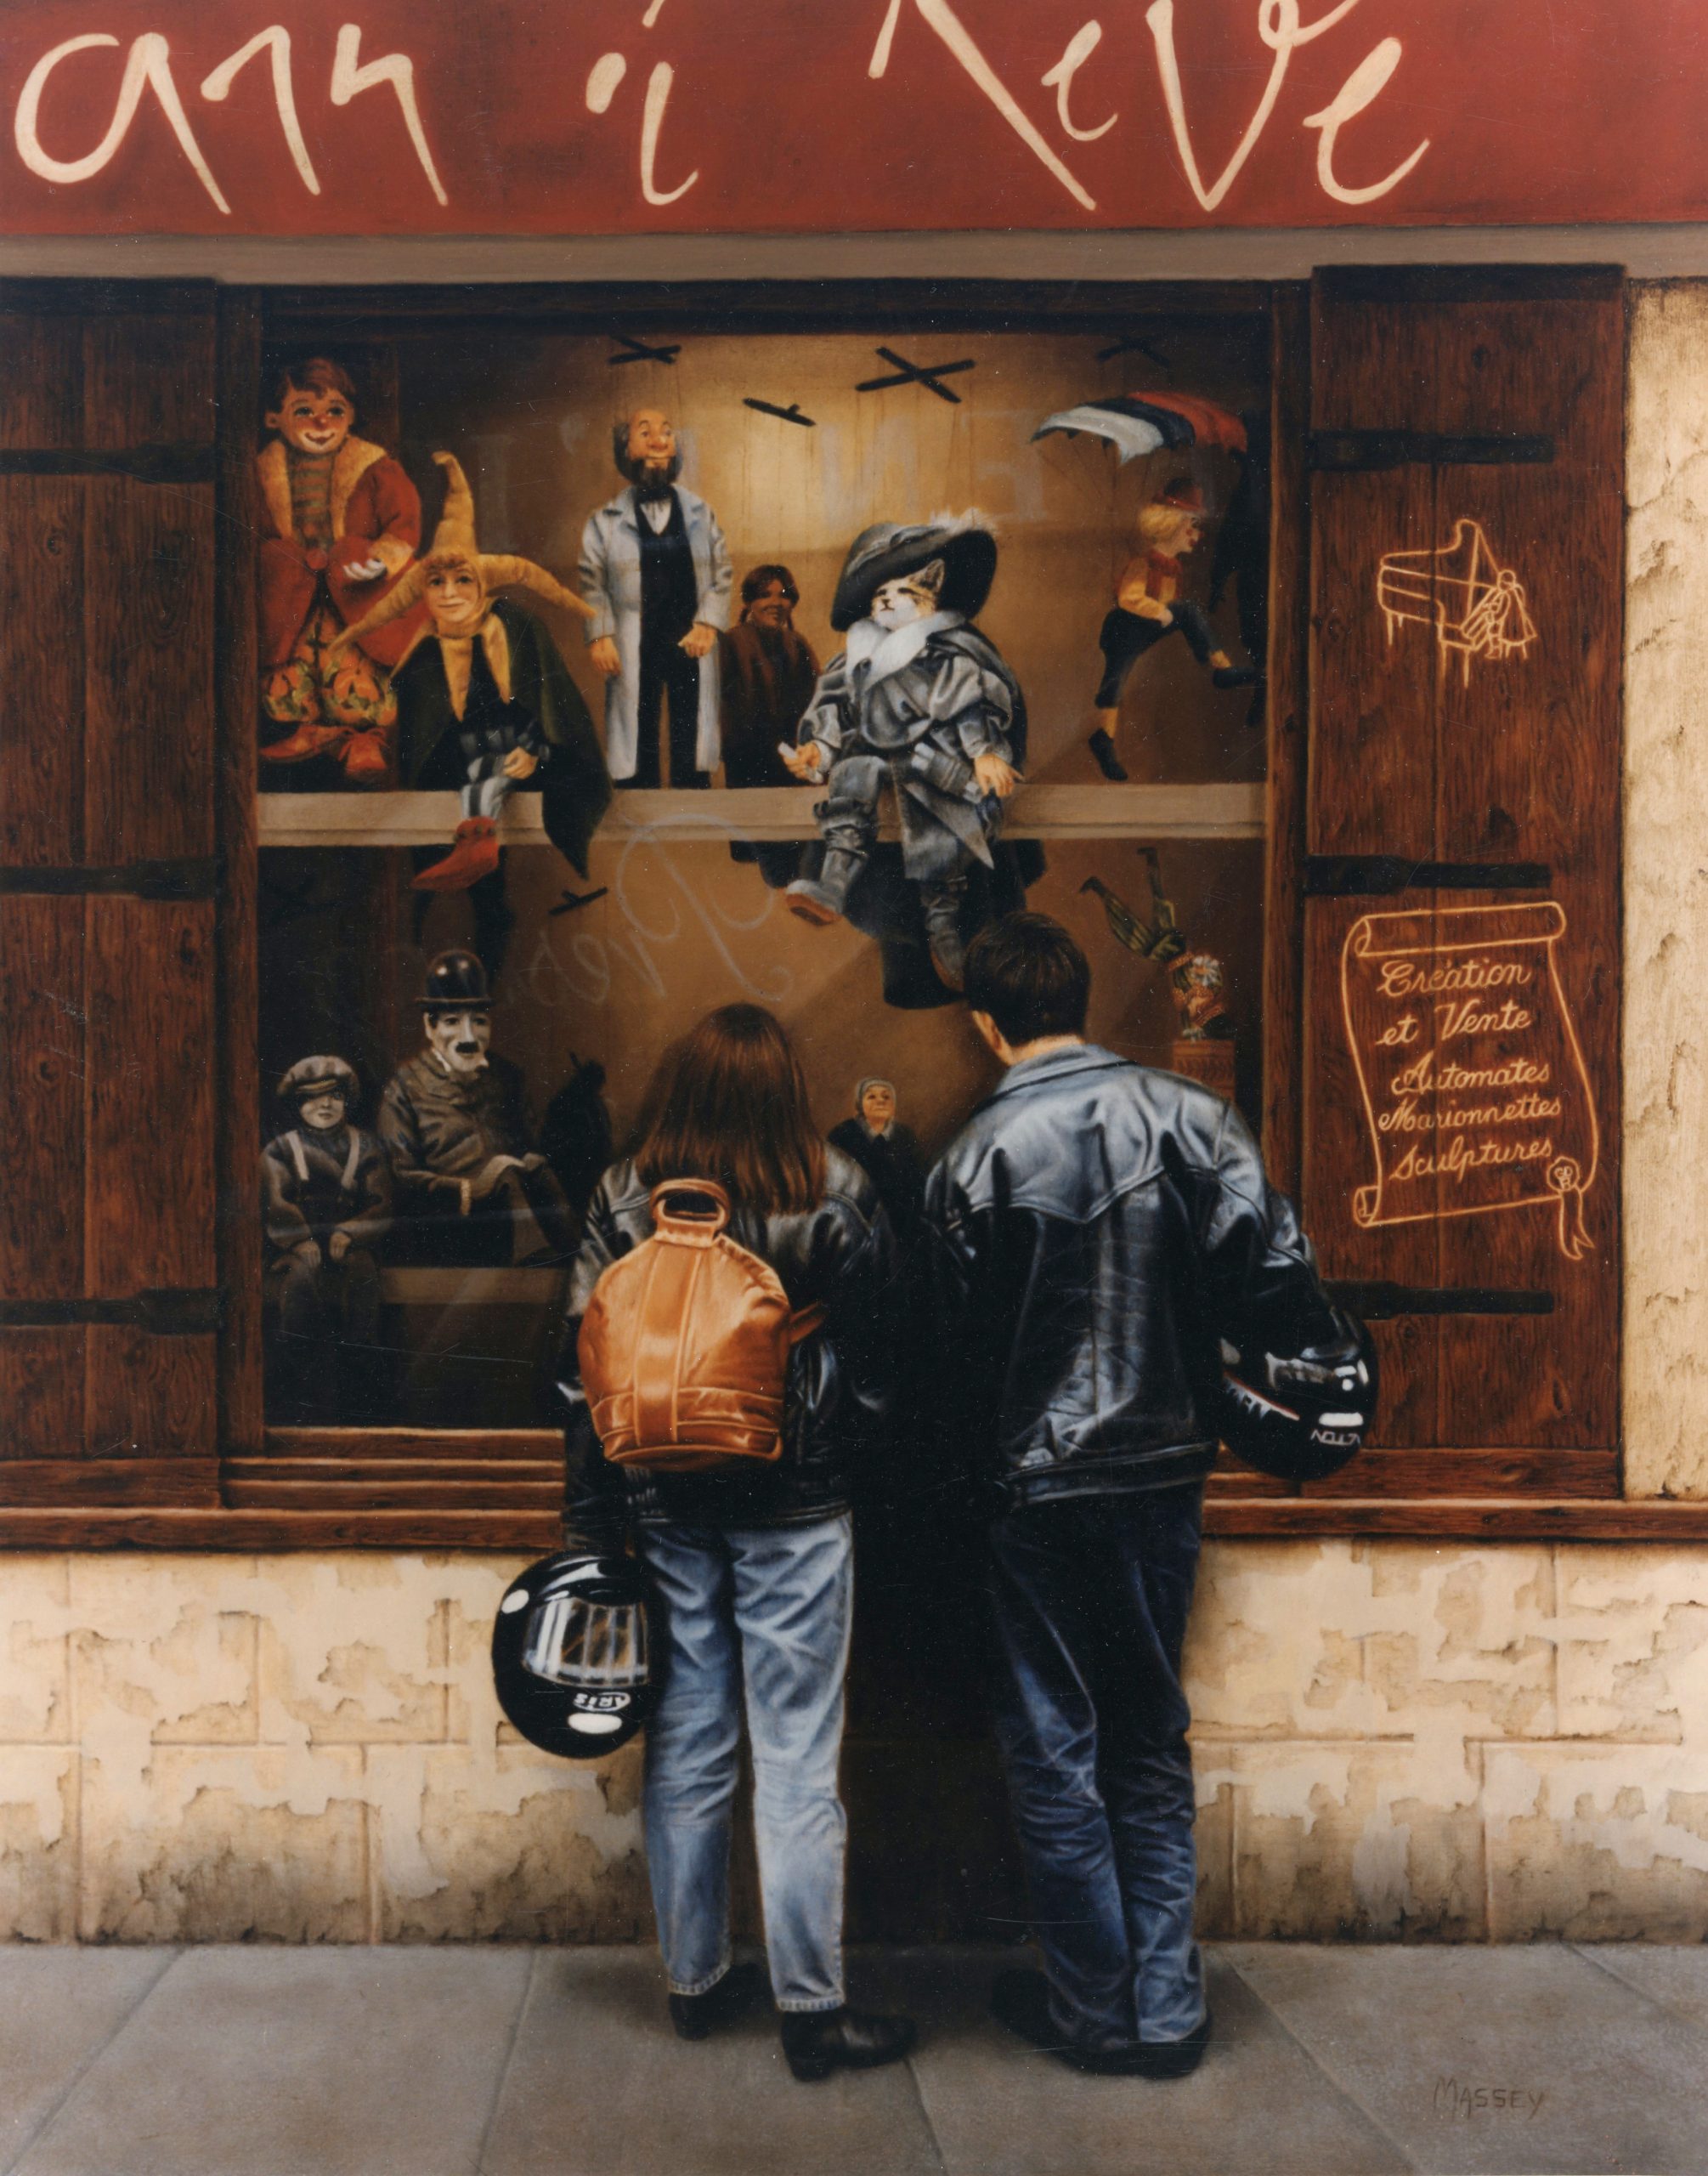 The Marionette Shop ©1996 Ann James Massey
20in x 16in | 50.8cm x 40.6cm
Oil on mahogany board
Collection of Gail Darling